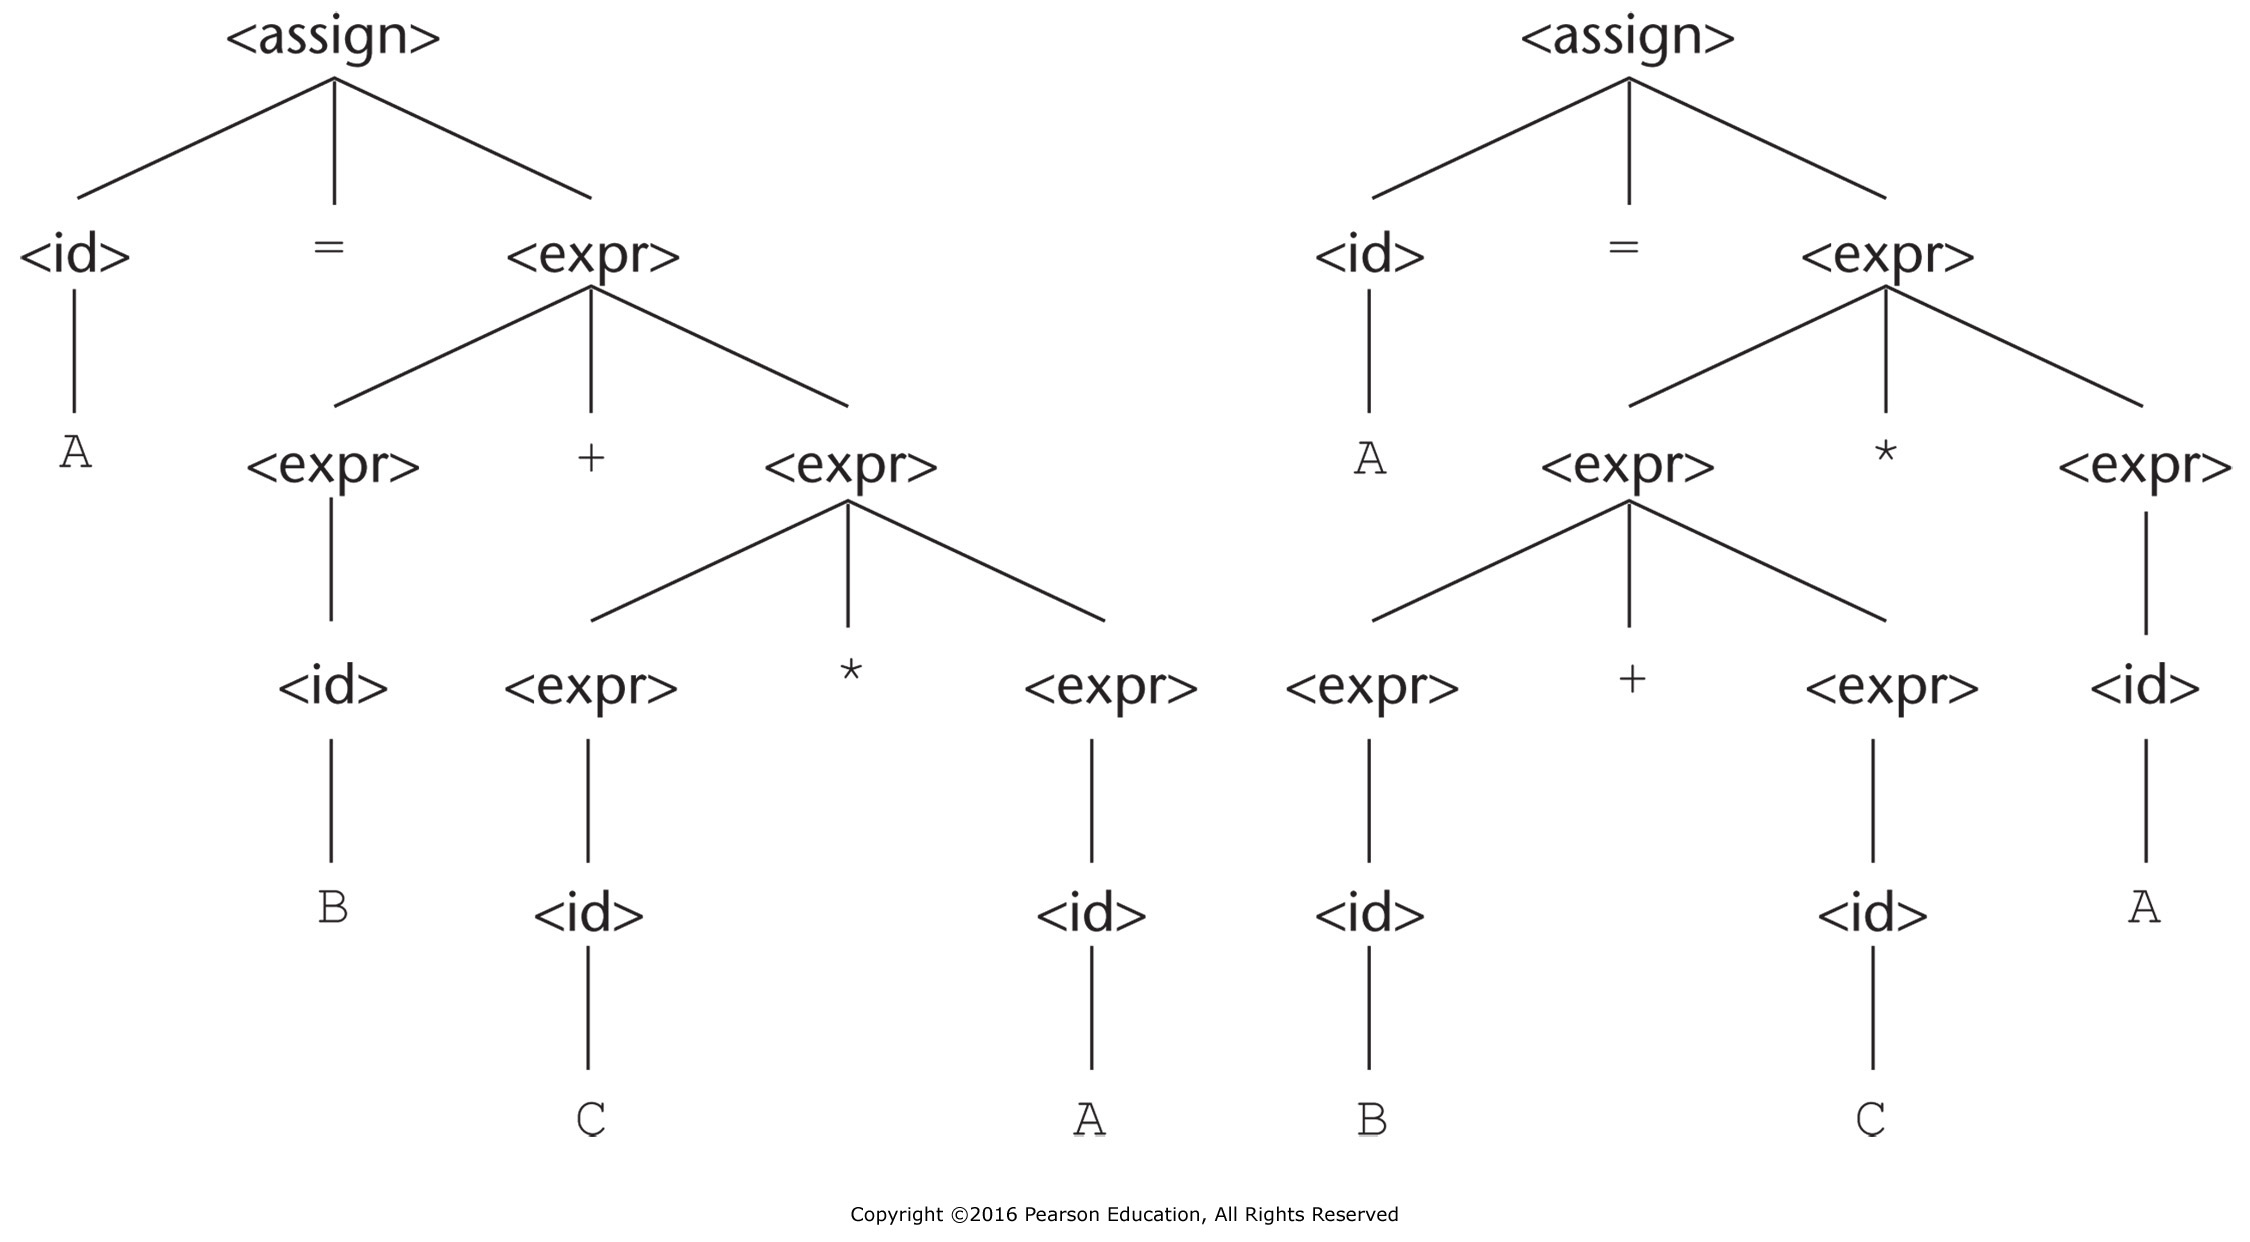 Example of ambiguous parse trees